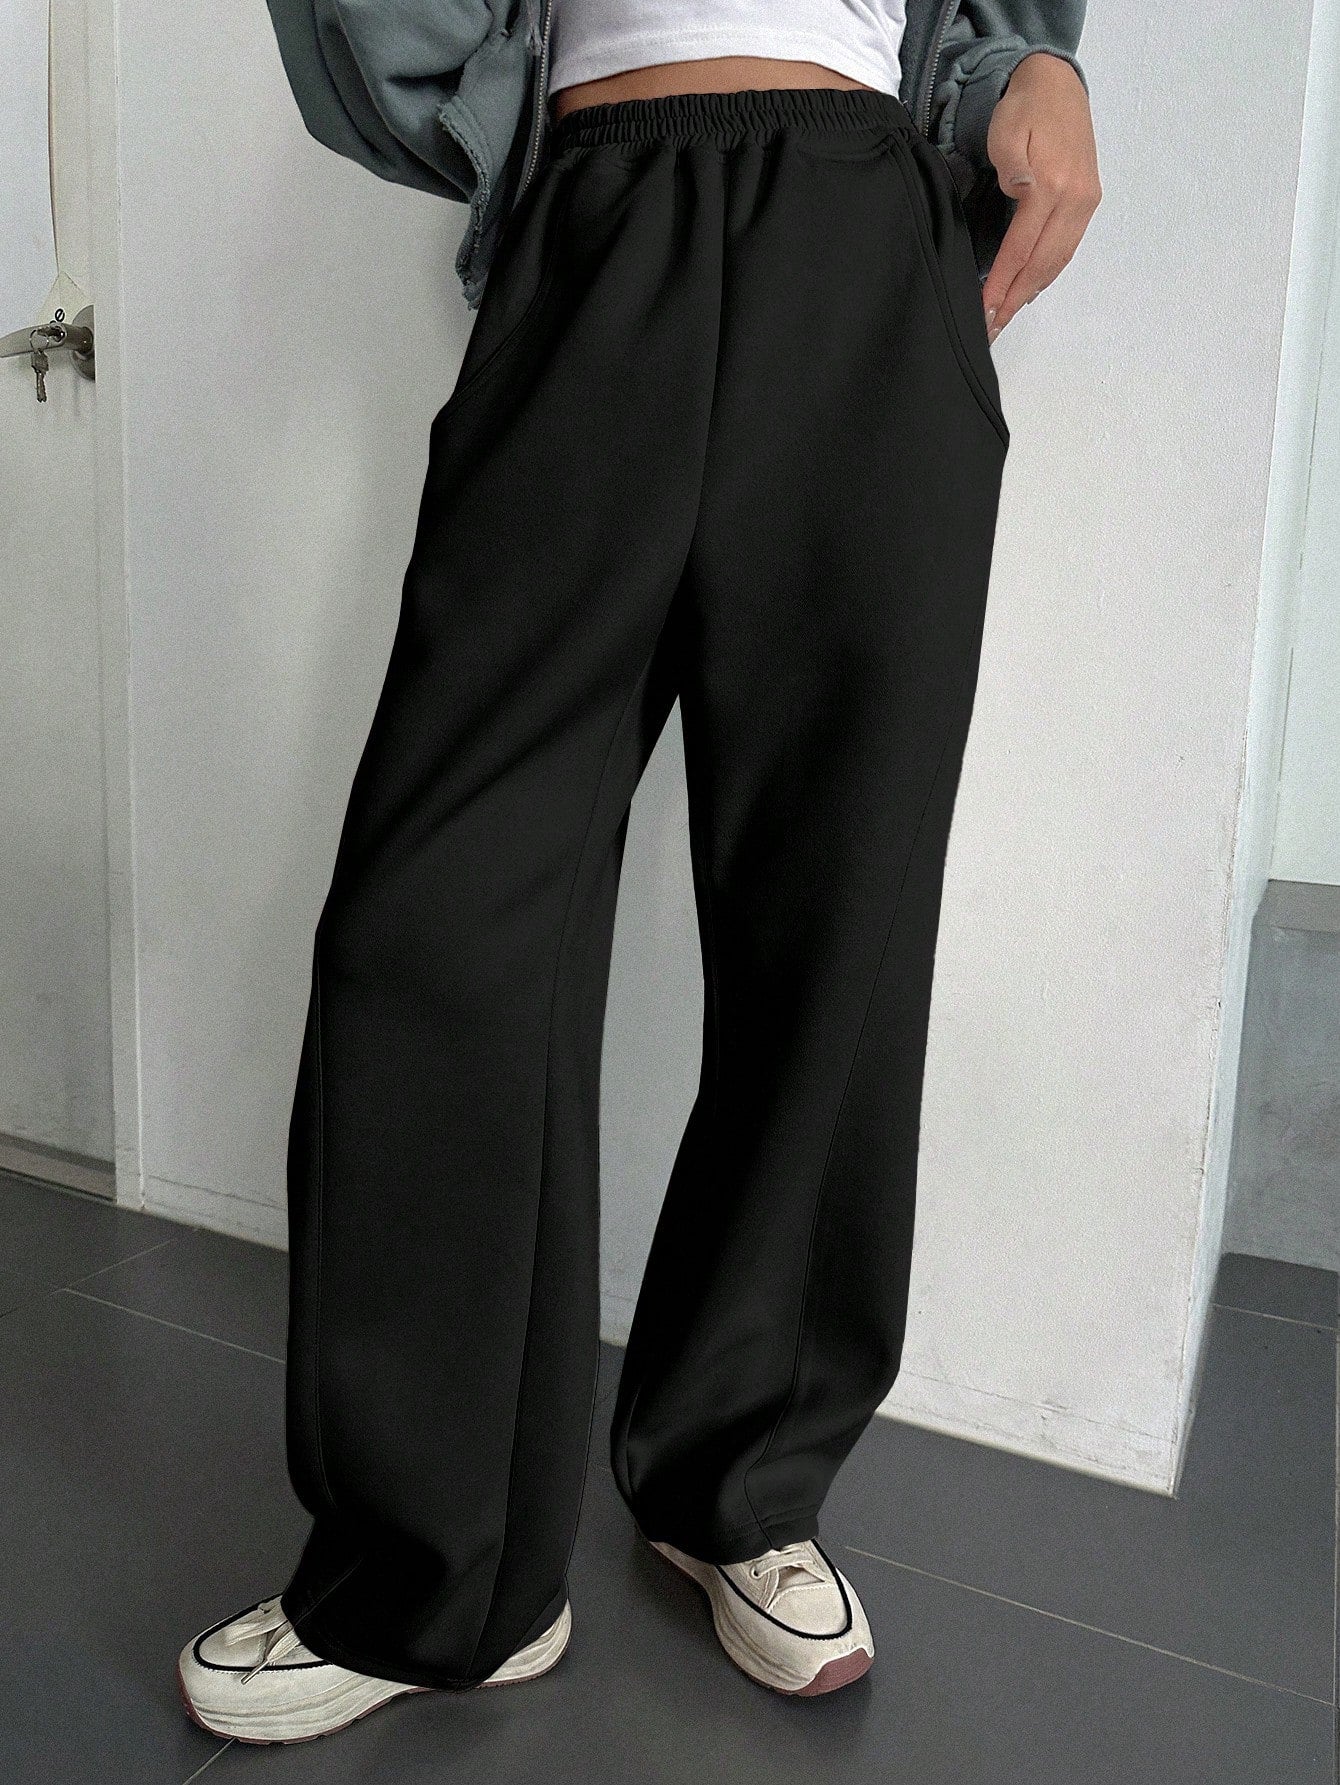 Women's Casual Loose Sweatpants With Pockets